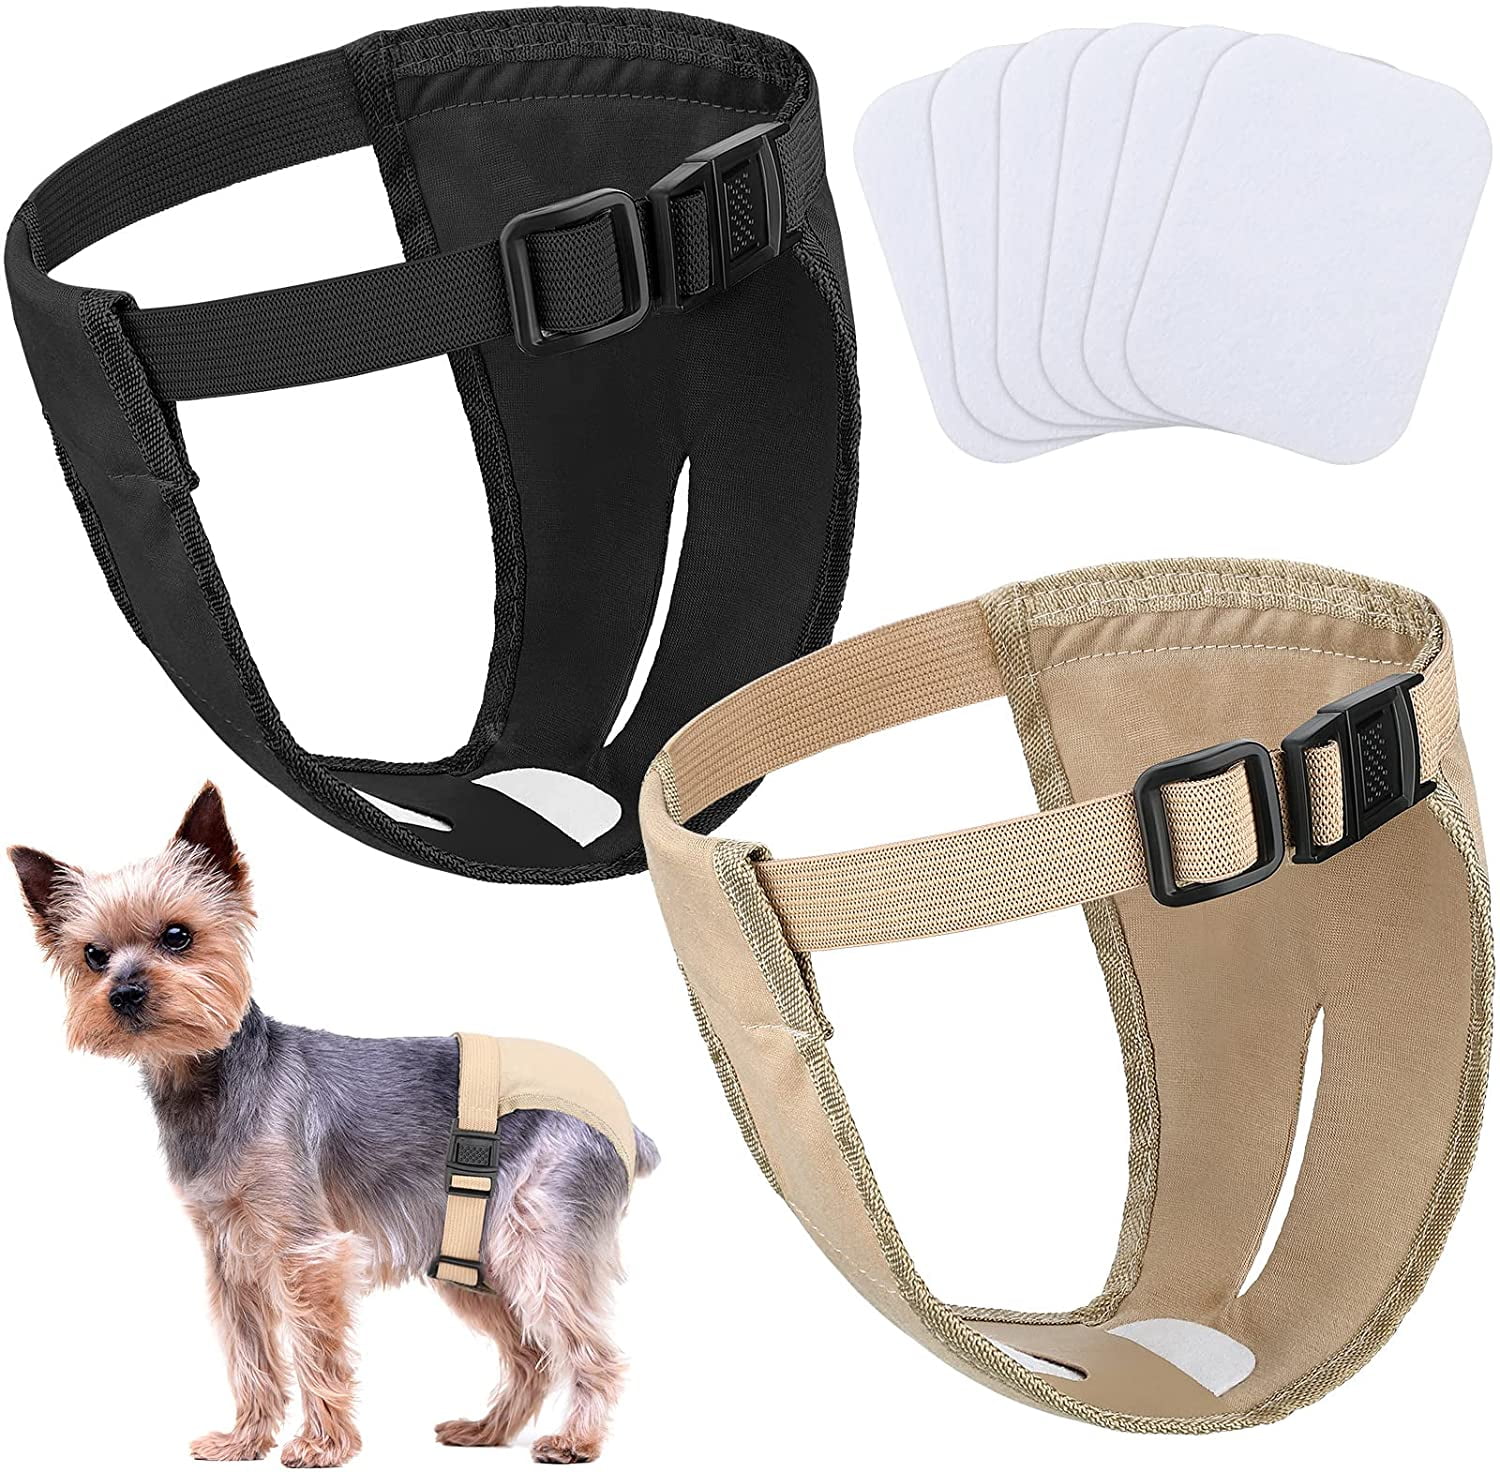 Dog Sanitary Nappy Diaper Female Dog Physiological Pants Washable Reusable  S M L  eBay